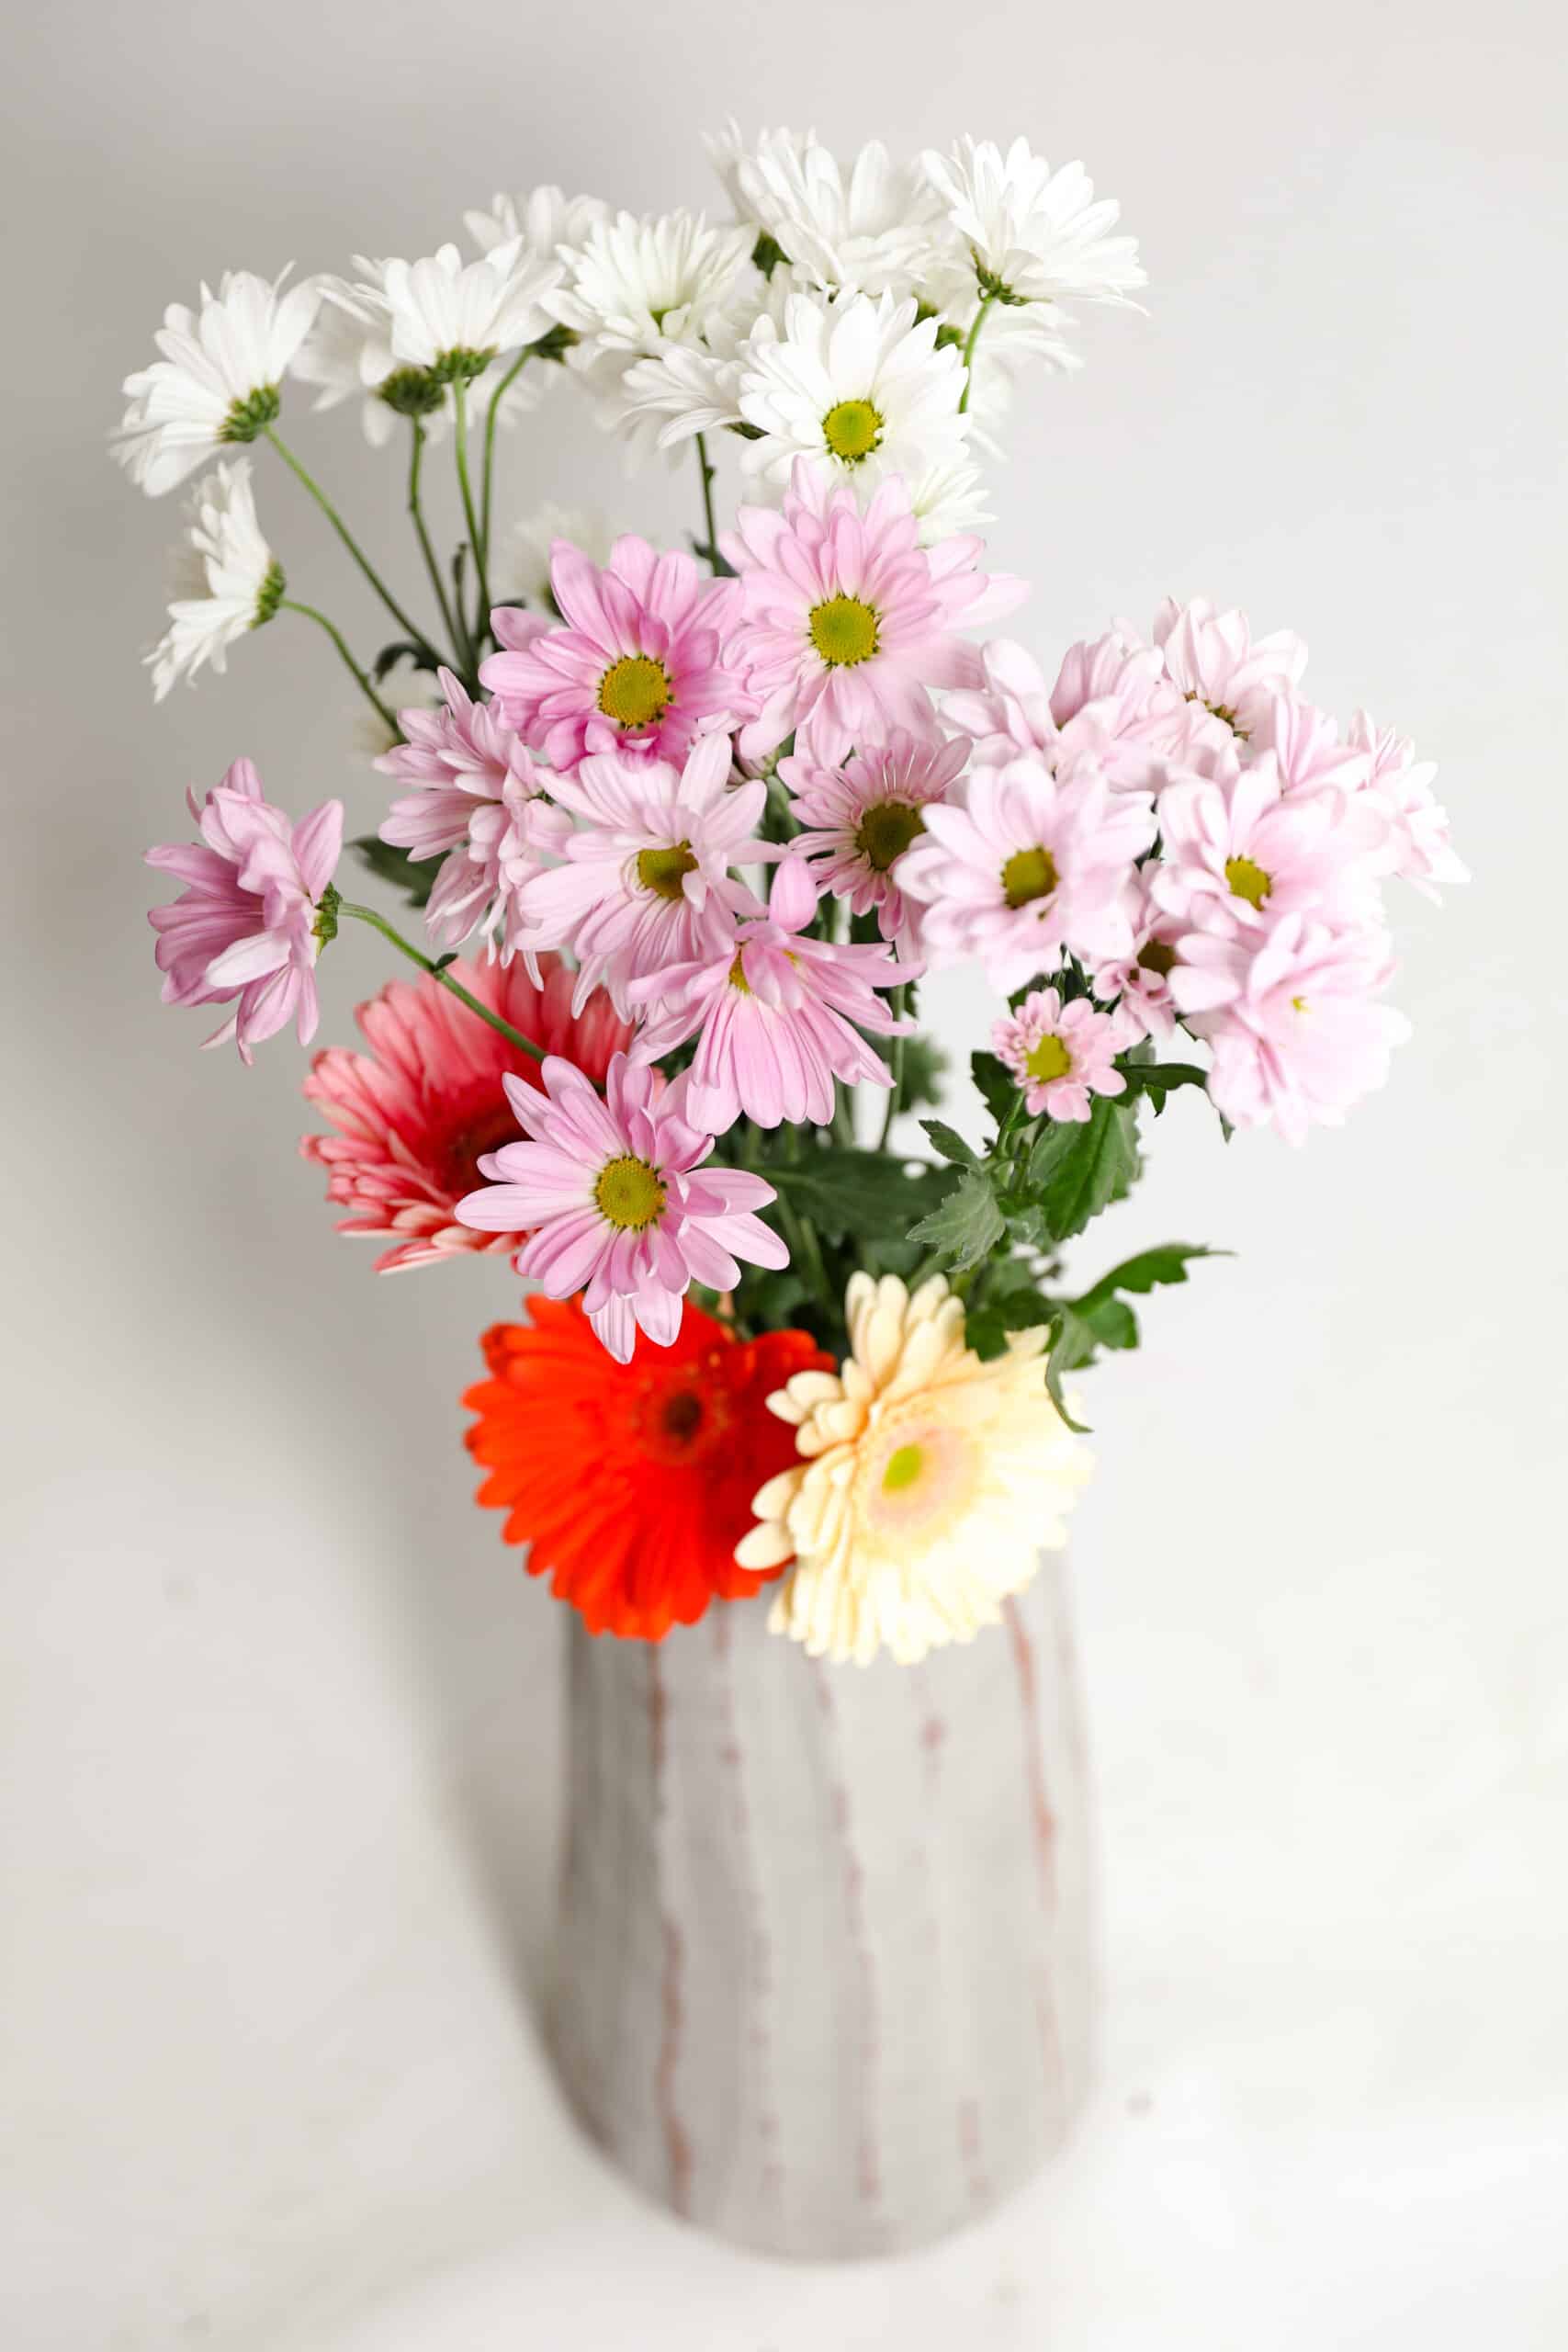 Daisies and Gerbera daisies in a vase